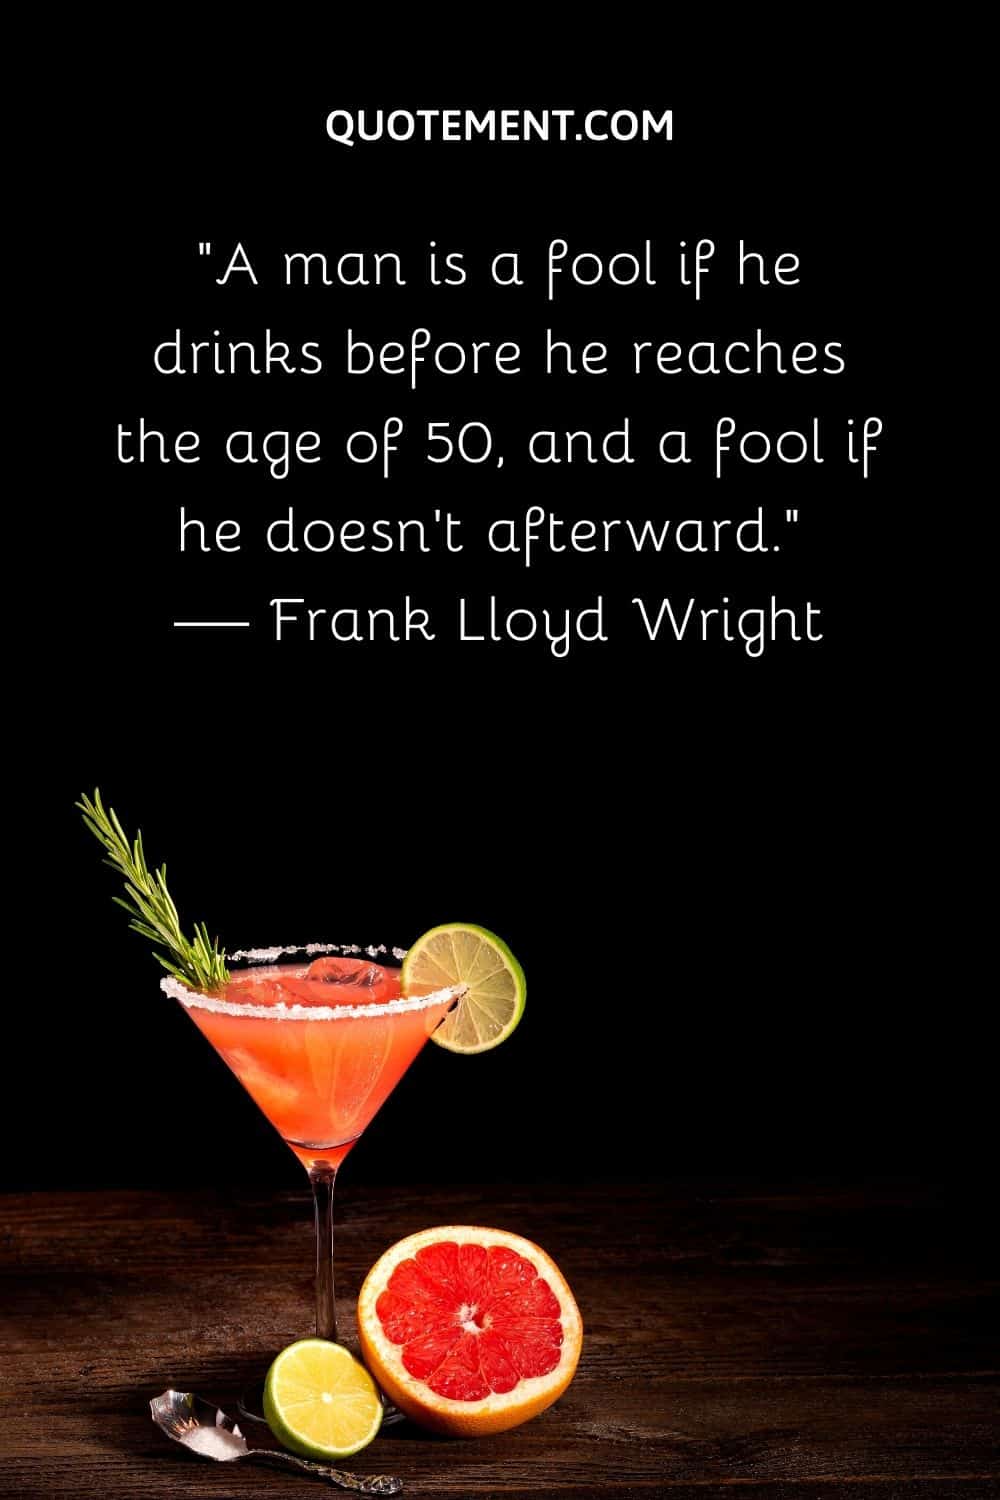 A man is a fool if he drinks before he reaches the age of 50